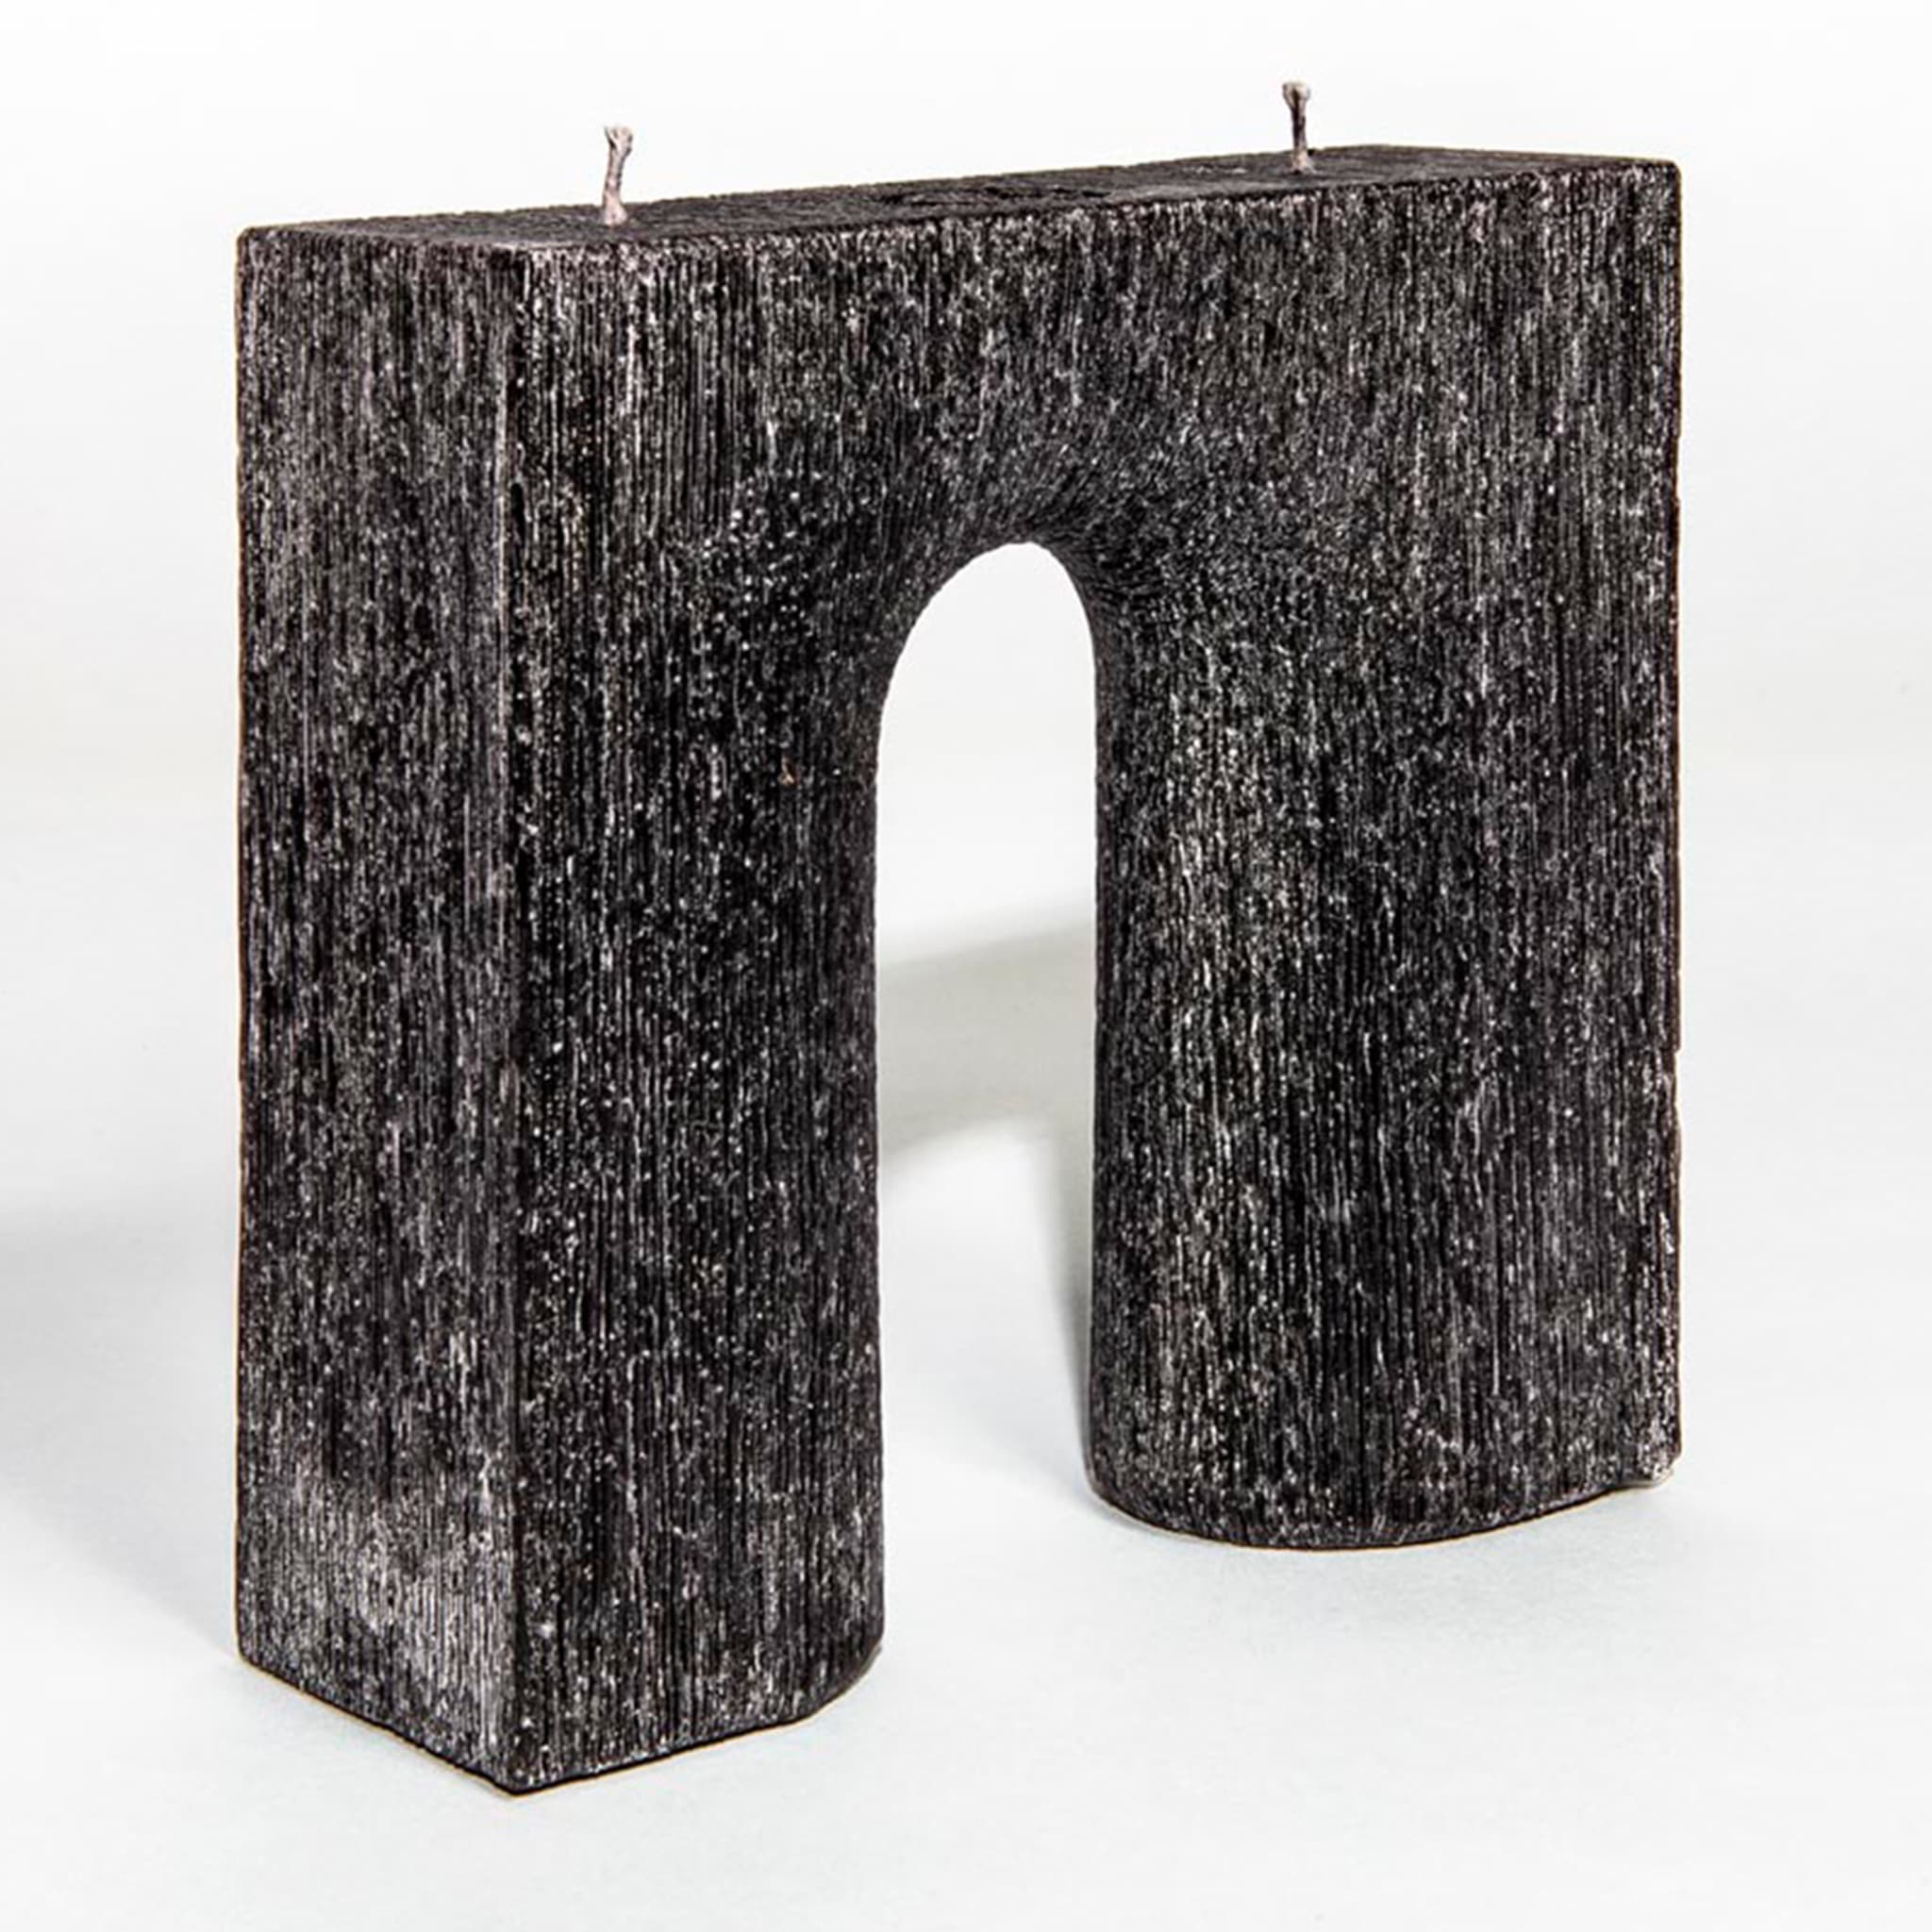 Trionfo Set of 2 Black Candles - Alternative view 2